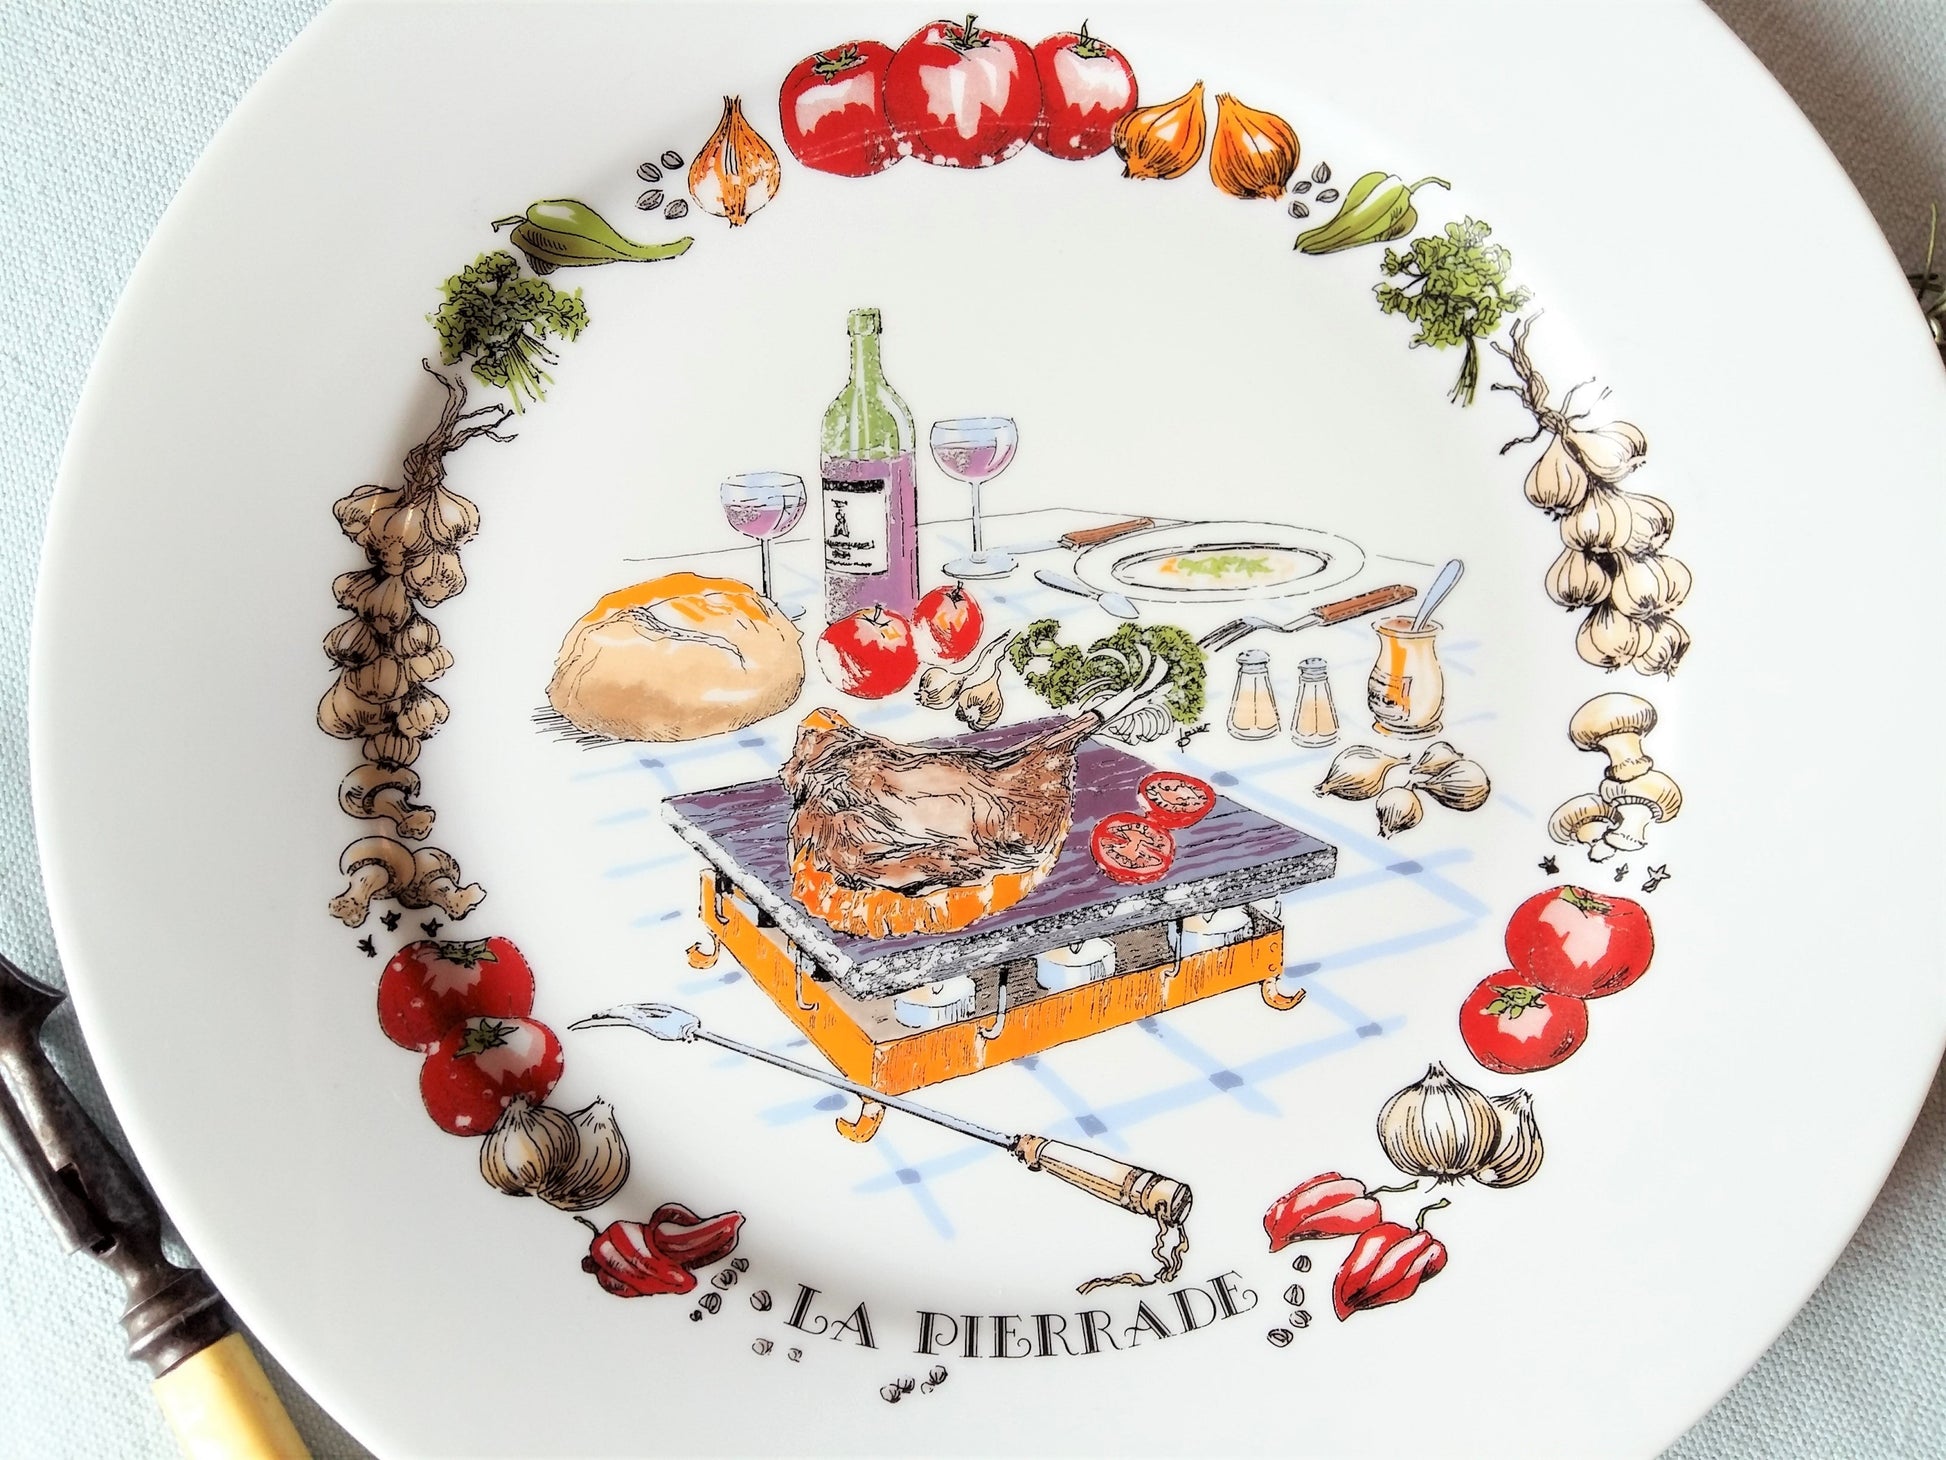 BBQ Plate Set. French Grill Platter. BBQ Grilling Dinnerware Set. from Tiggy & Pip - €180.00! Shop now at Tiggy and Pip